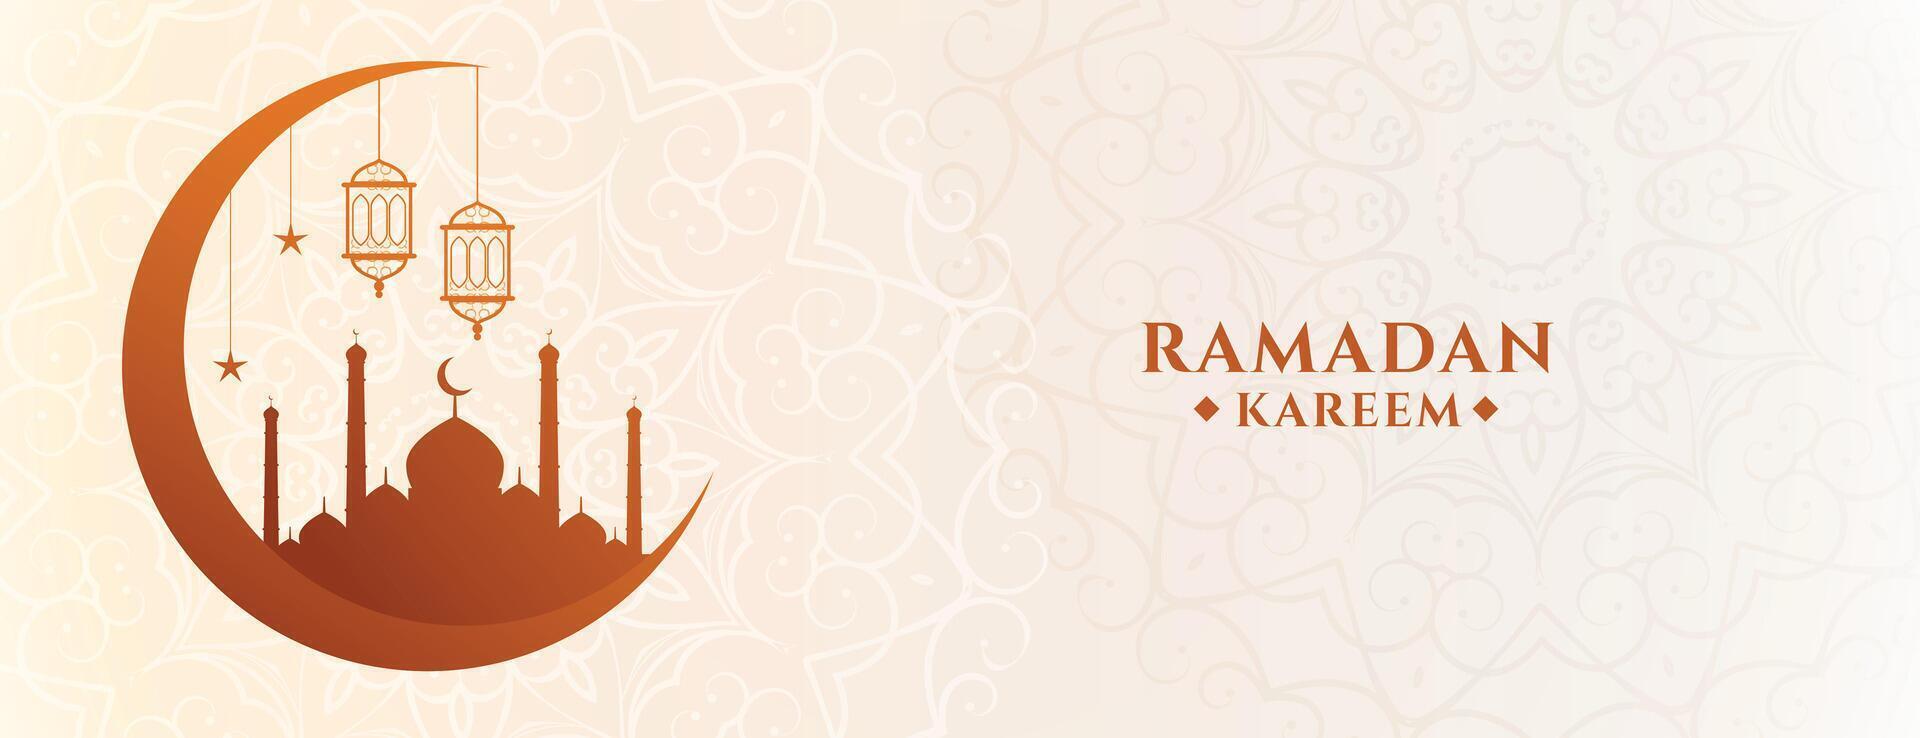 ramadan blessing banner with mosque and moon vector